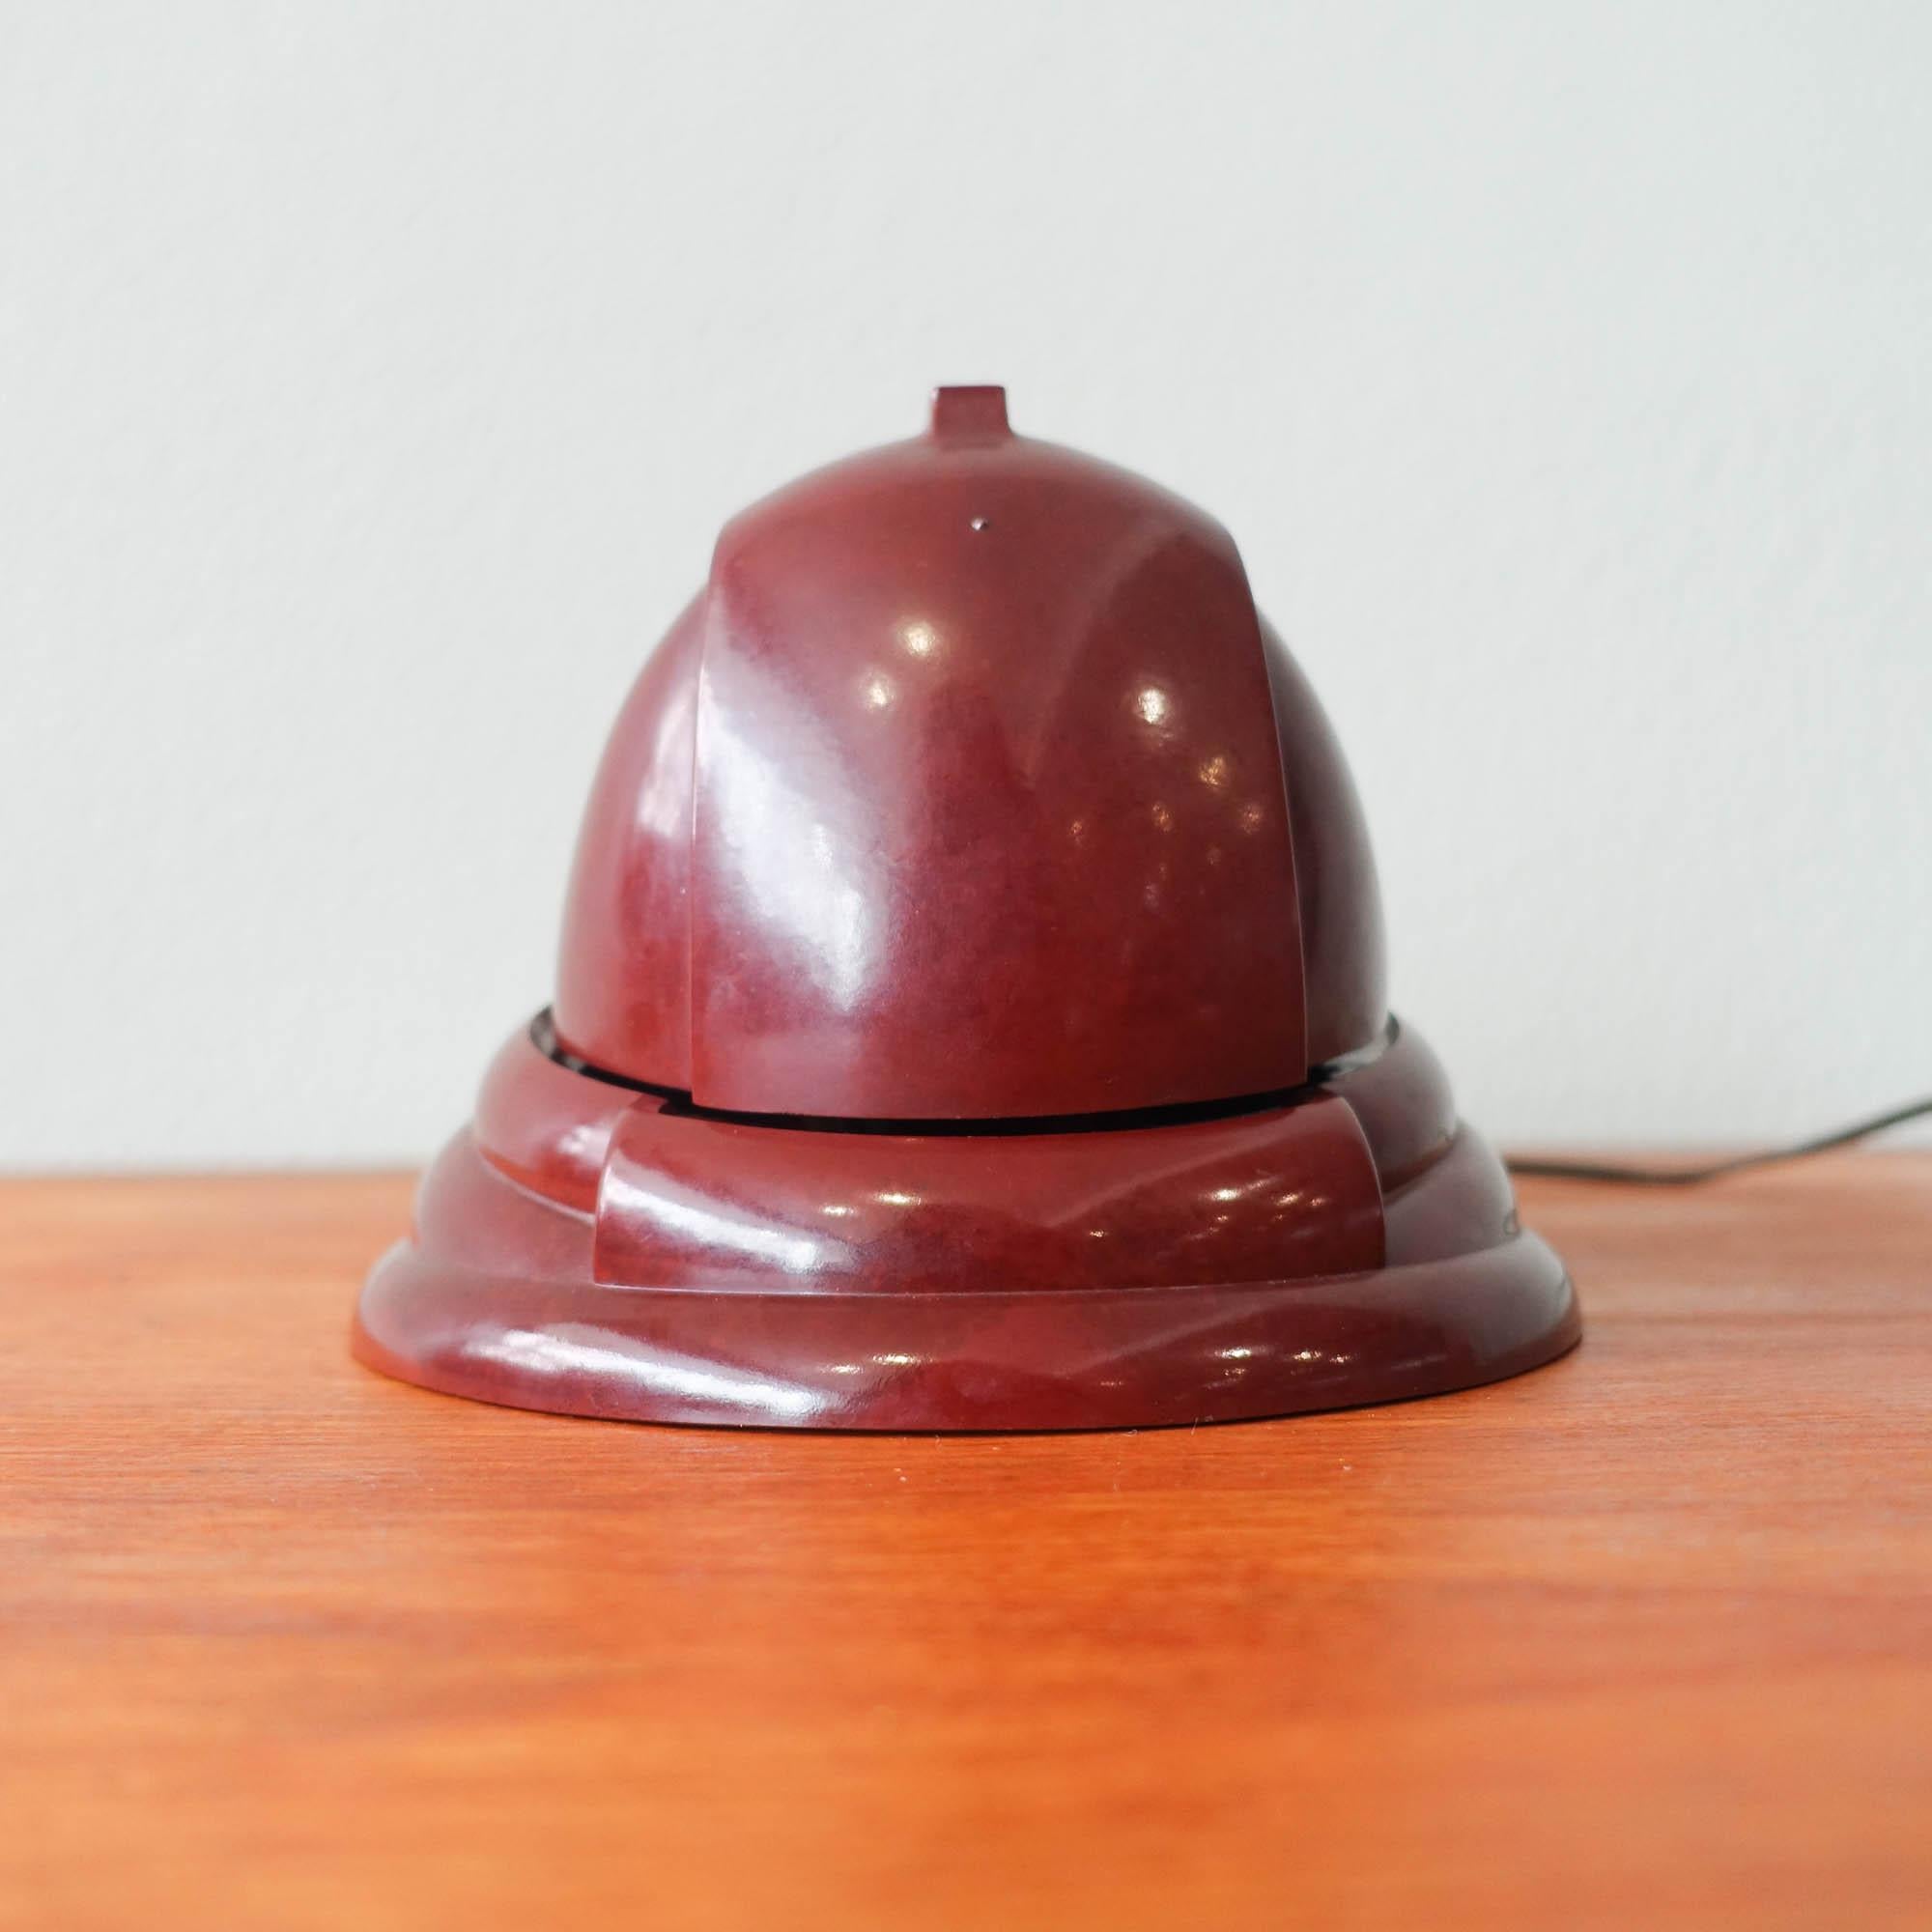 Model Bolide Table Lamp by Jumo Brevete for Jumo, 1940s For Sale 4